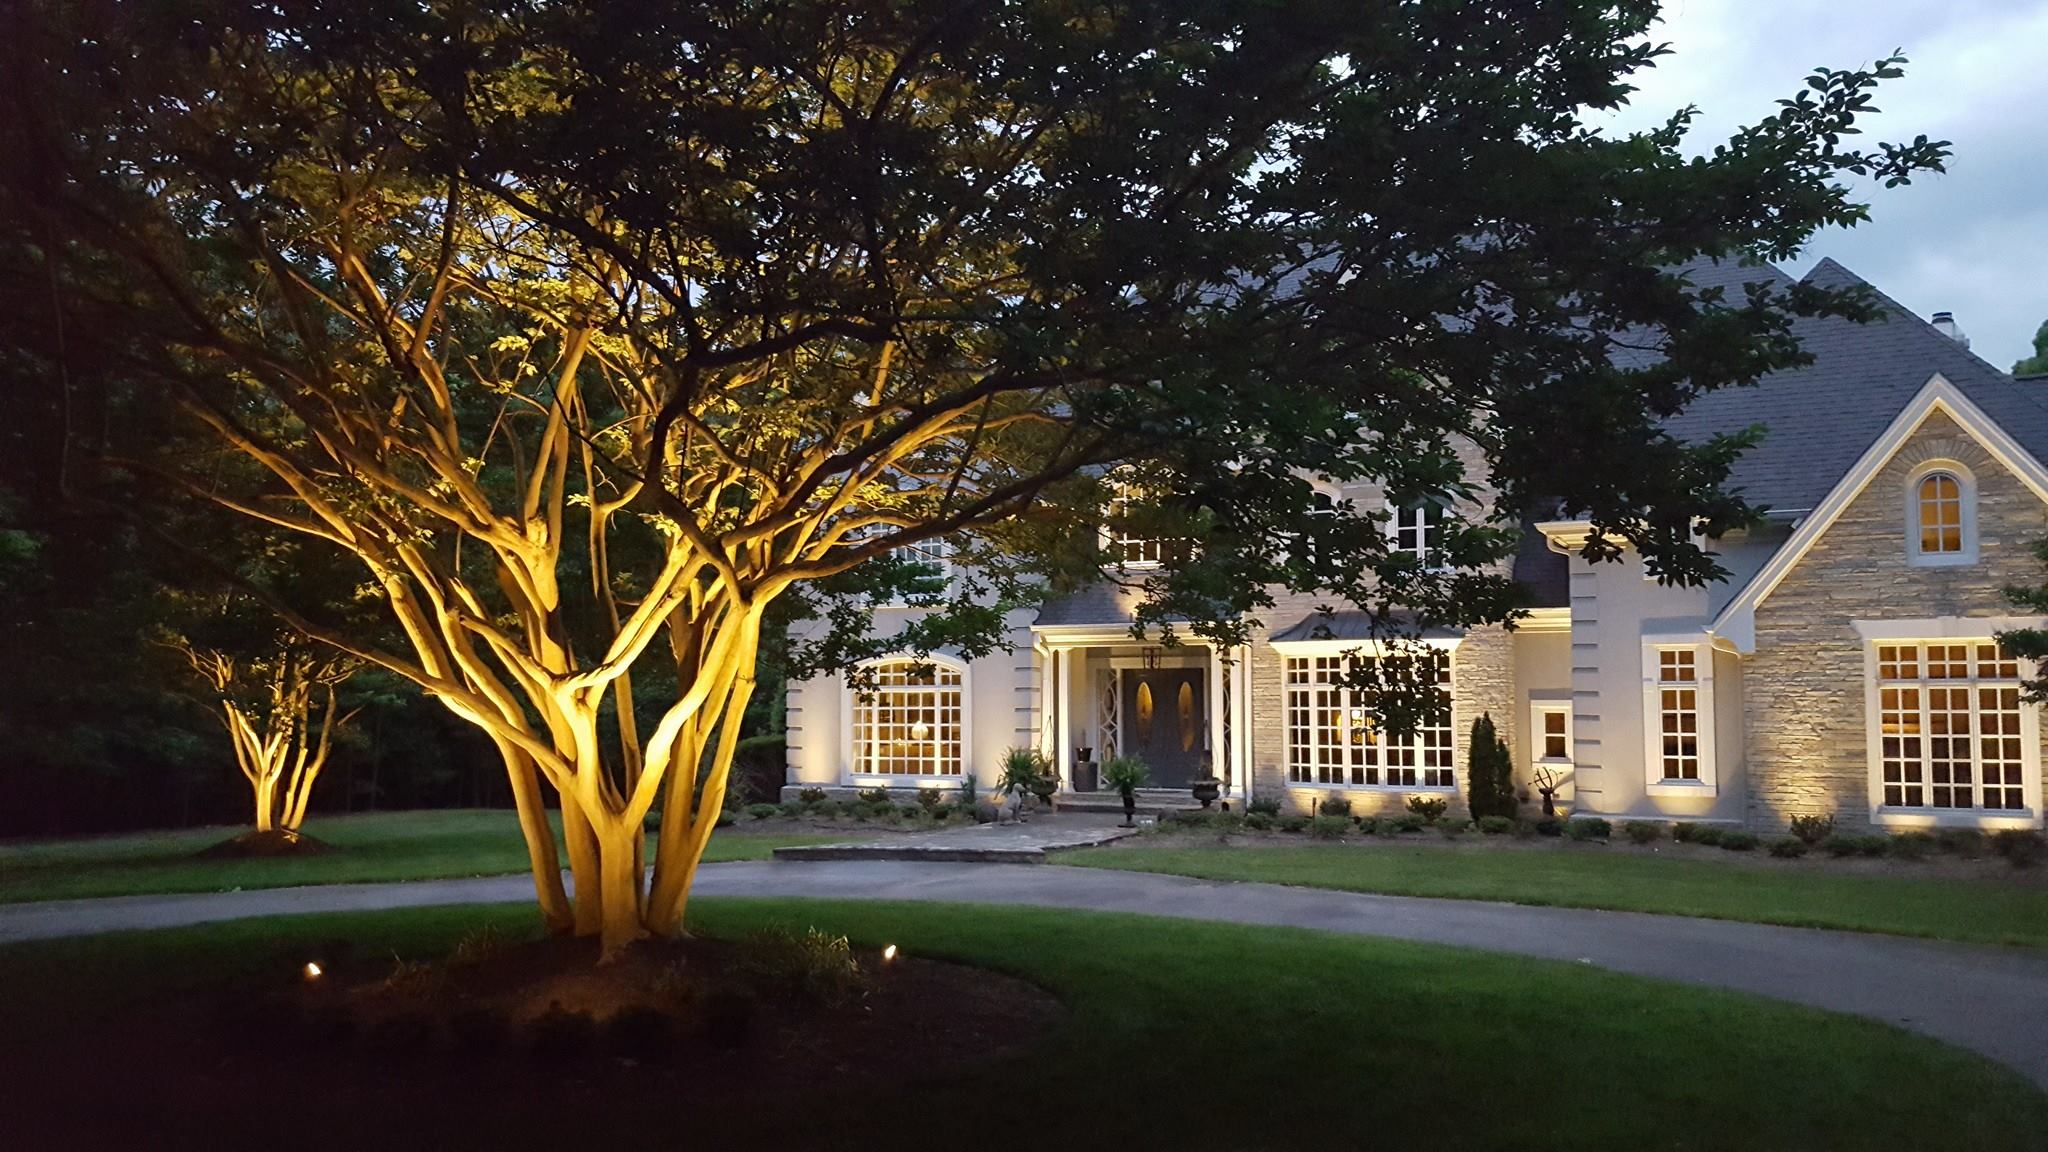 Home entrance and front yard with special lighting